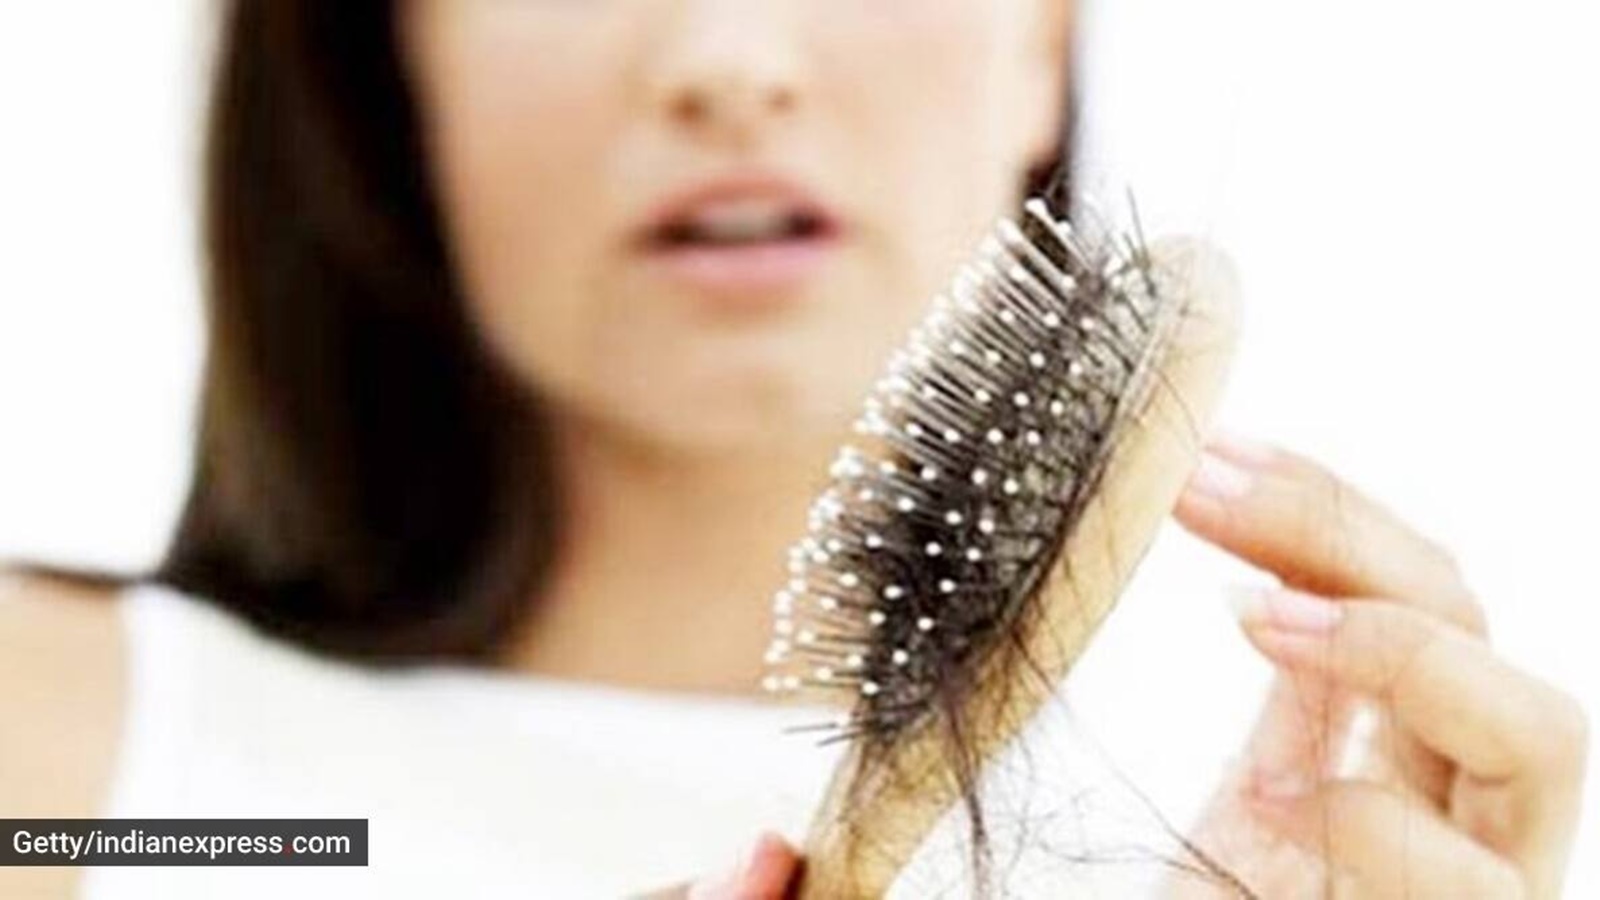 Hair Loss in Women Over 40: Causes and Treatments